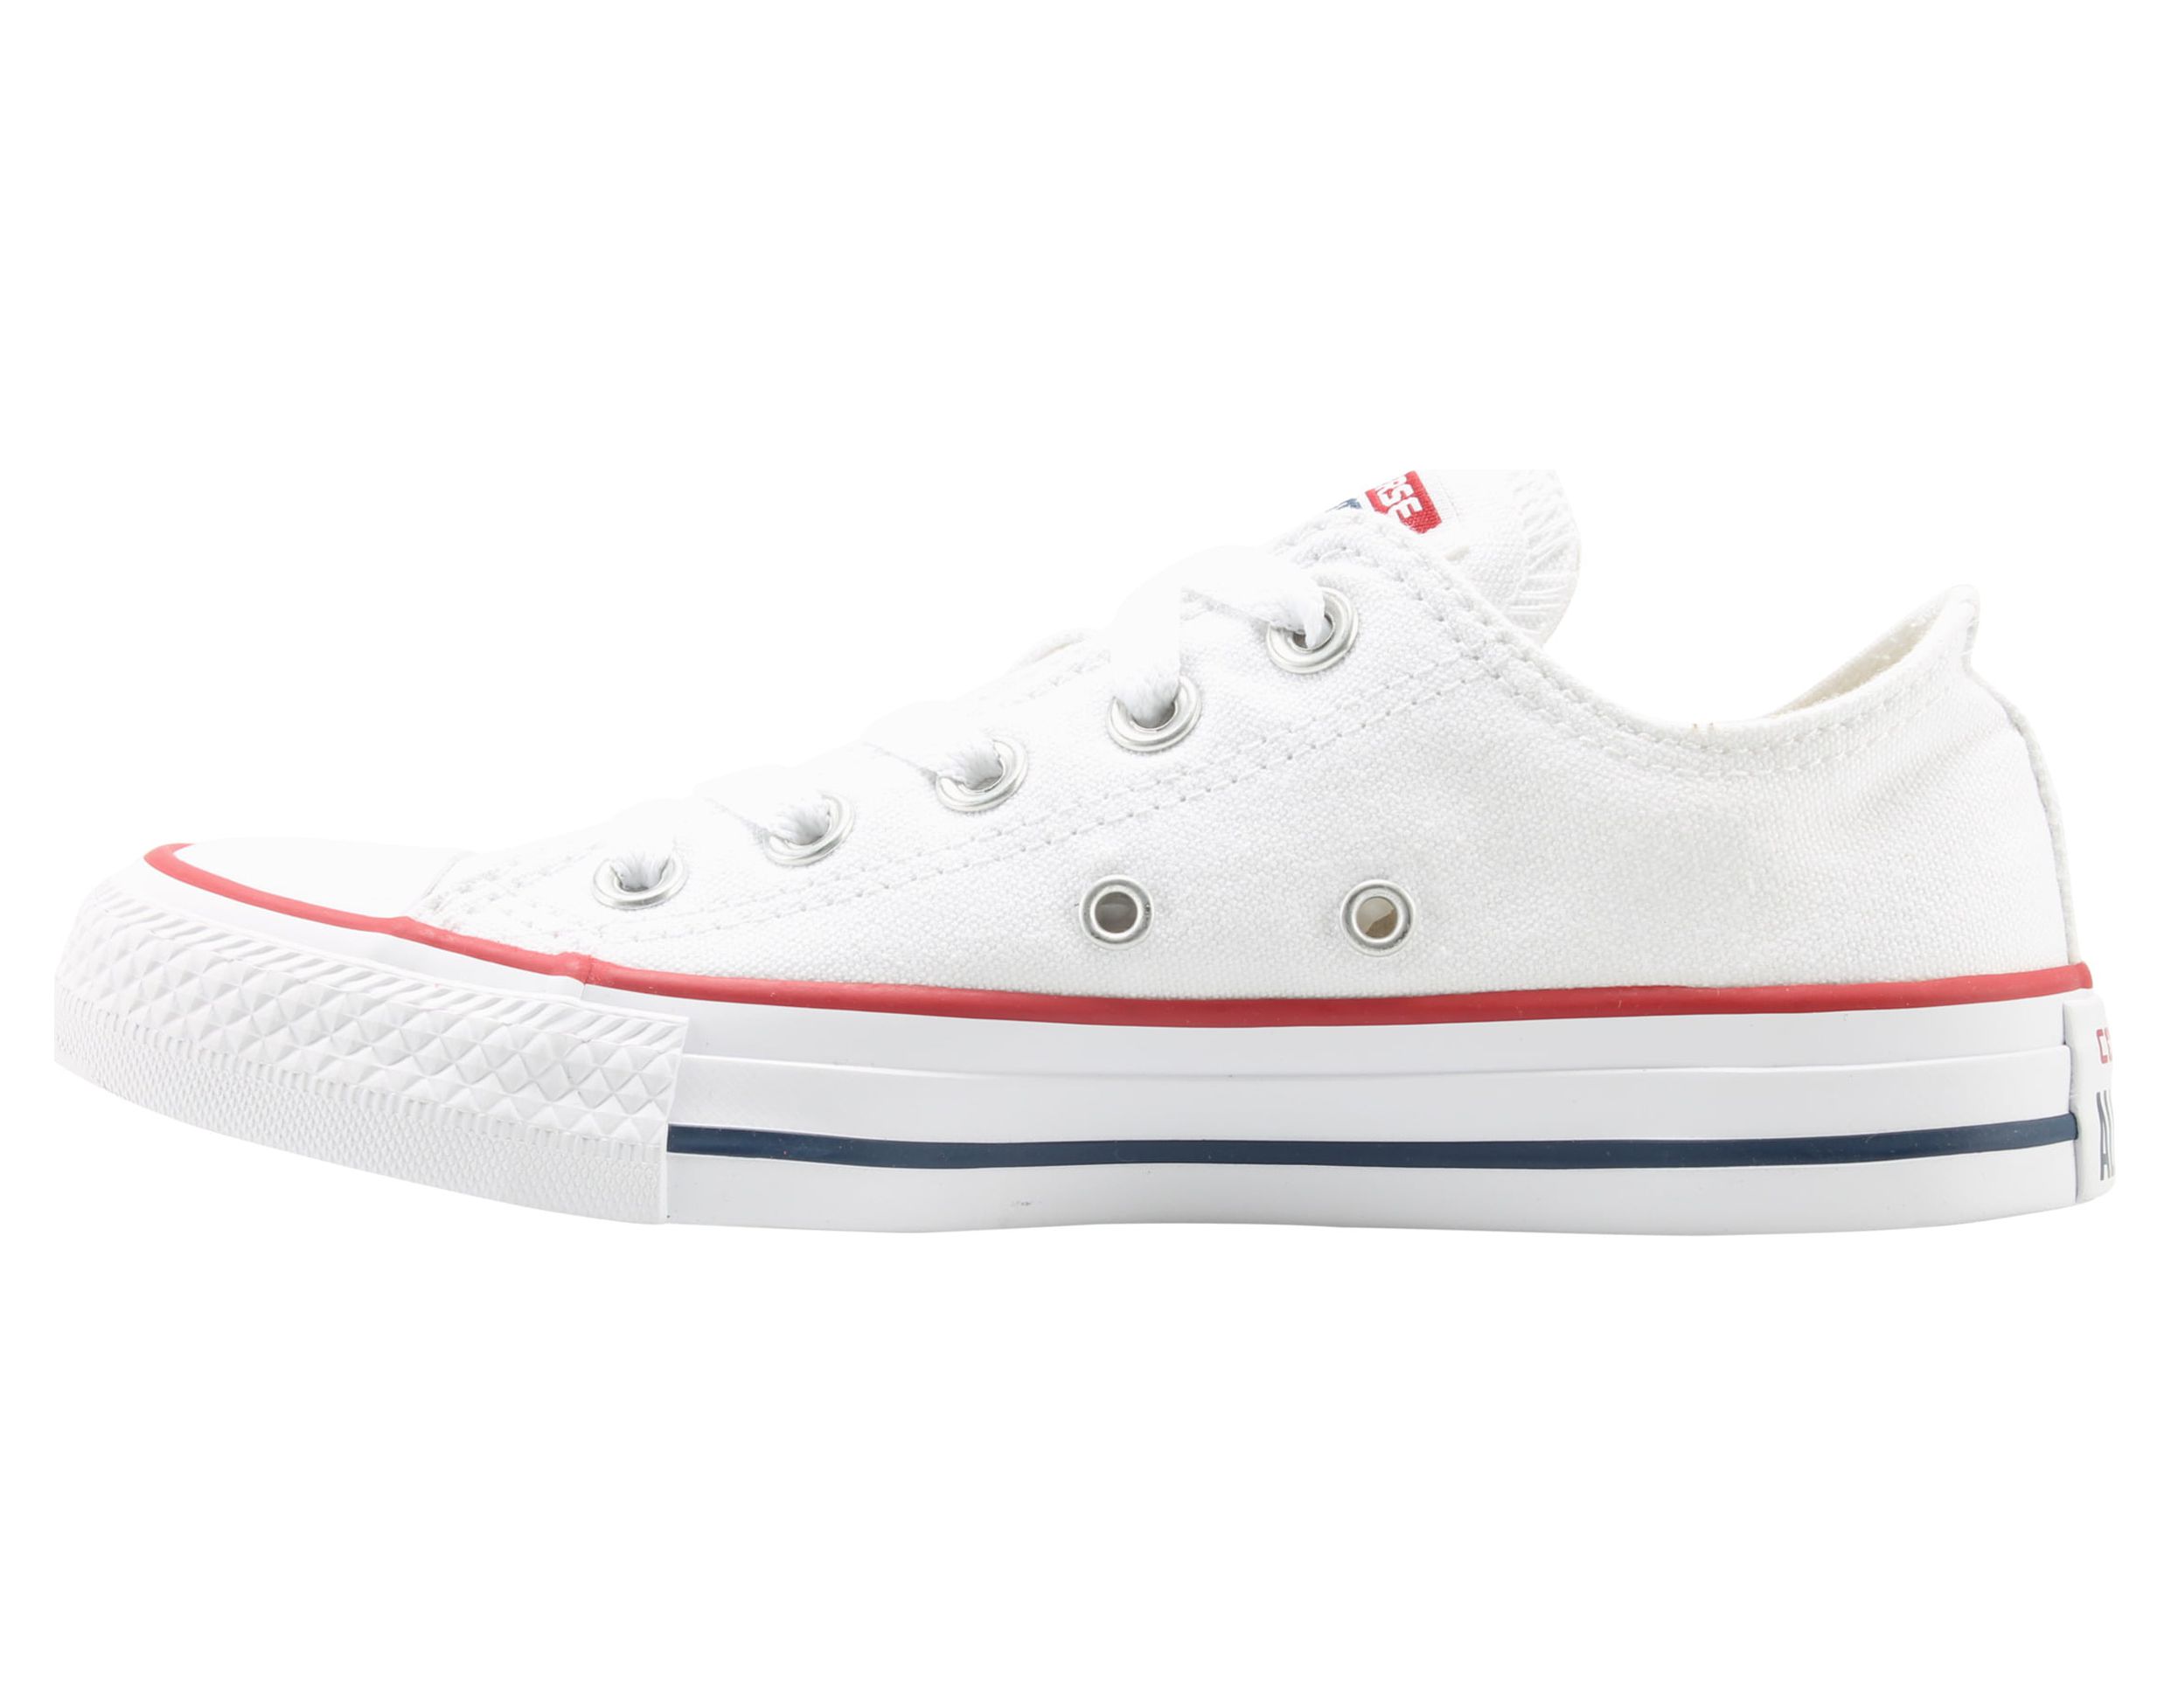 Converse M7652 / M7652C Chuck Taylor All Star Low Top Canvas Optical White - image 3 of 6